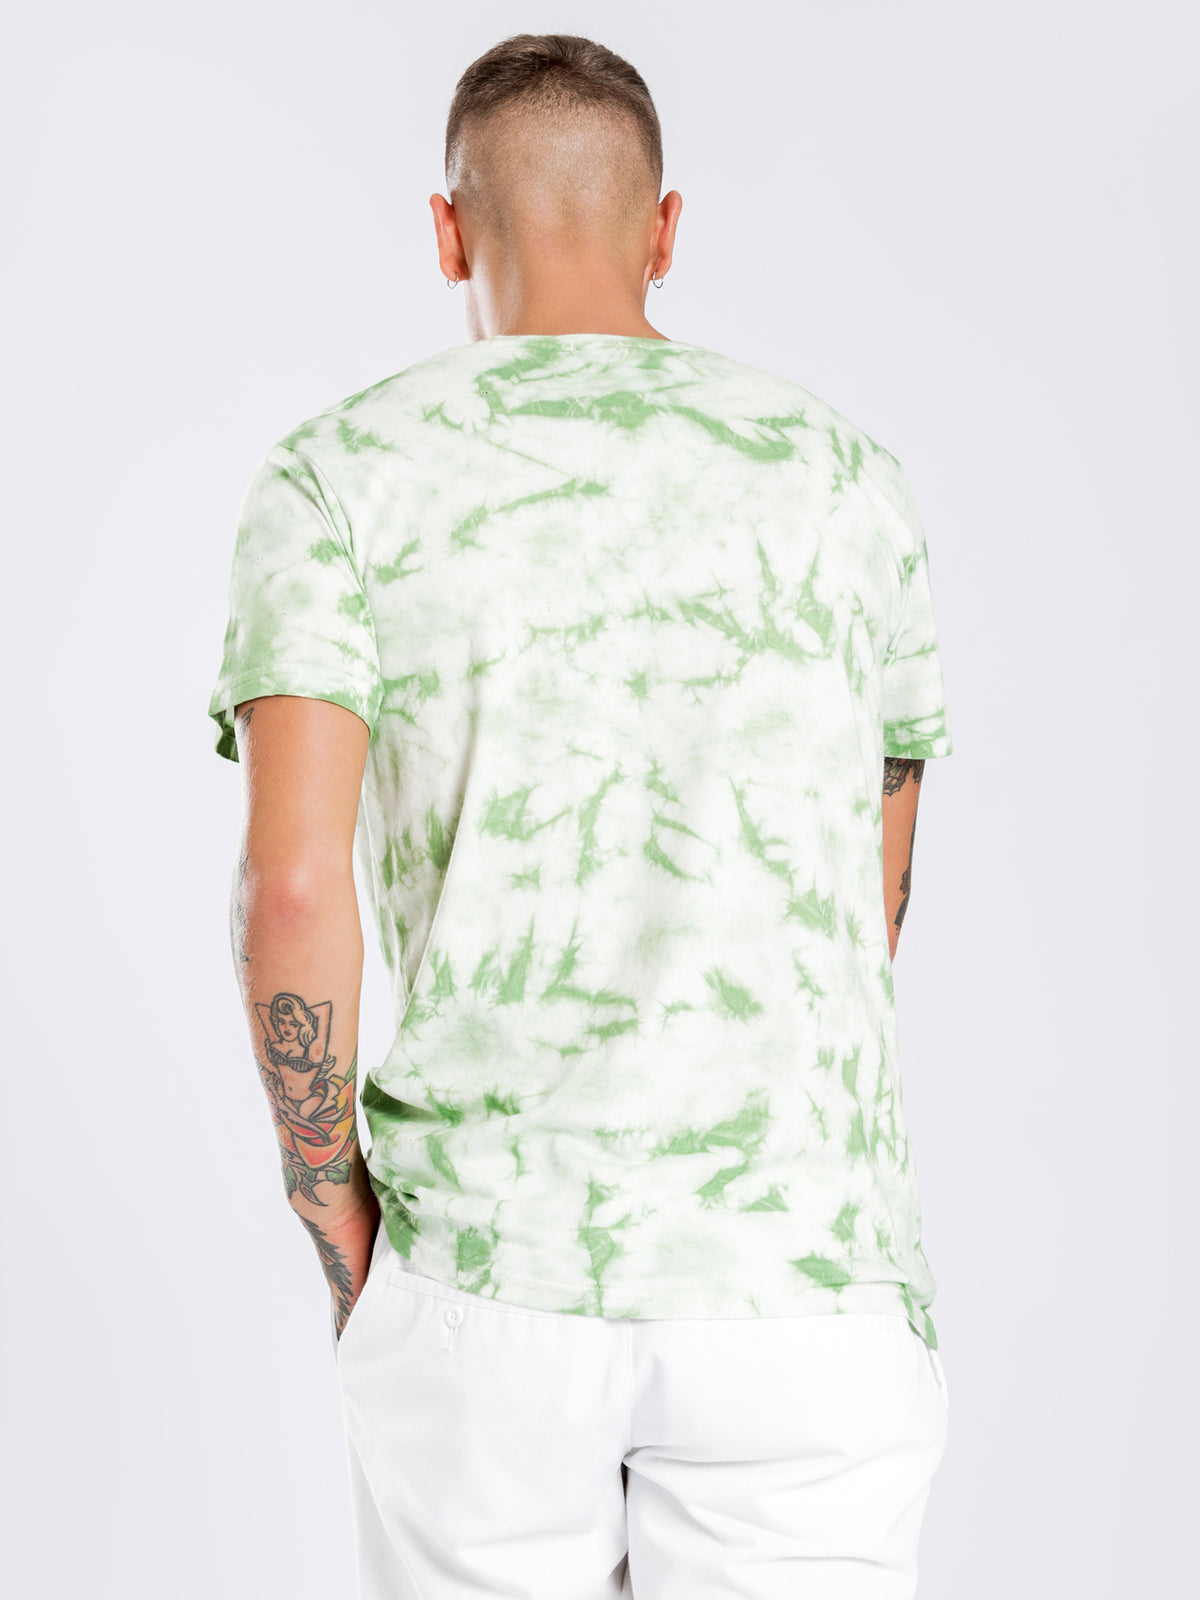 Authentic Costium T-Shirt in Green Tie Dye